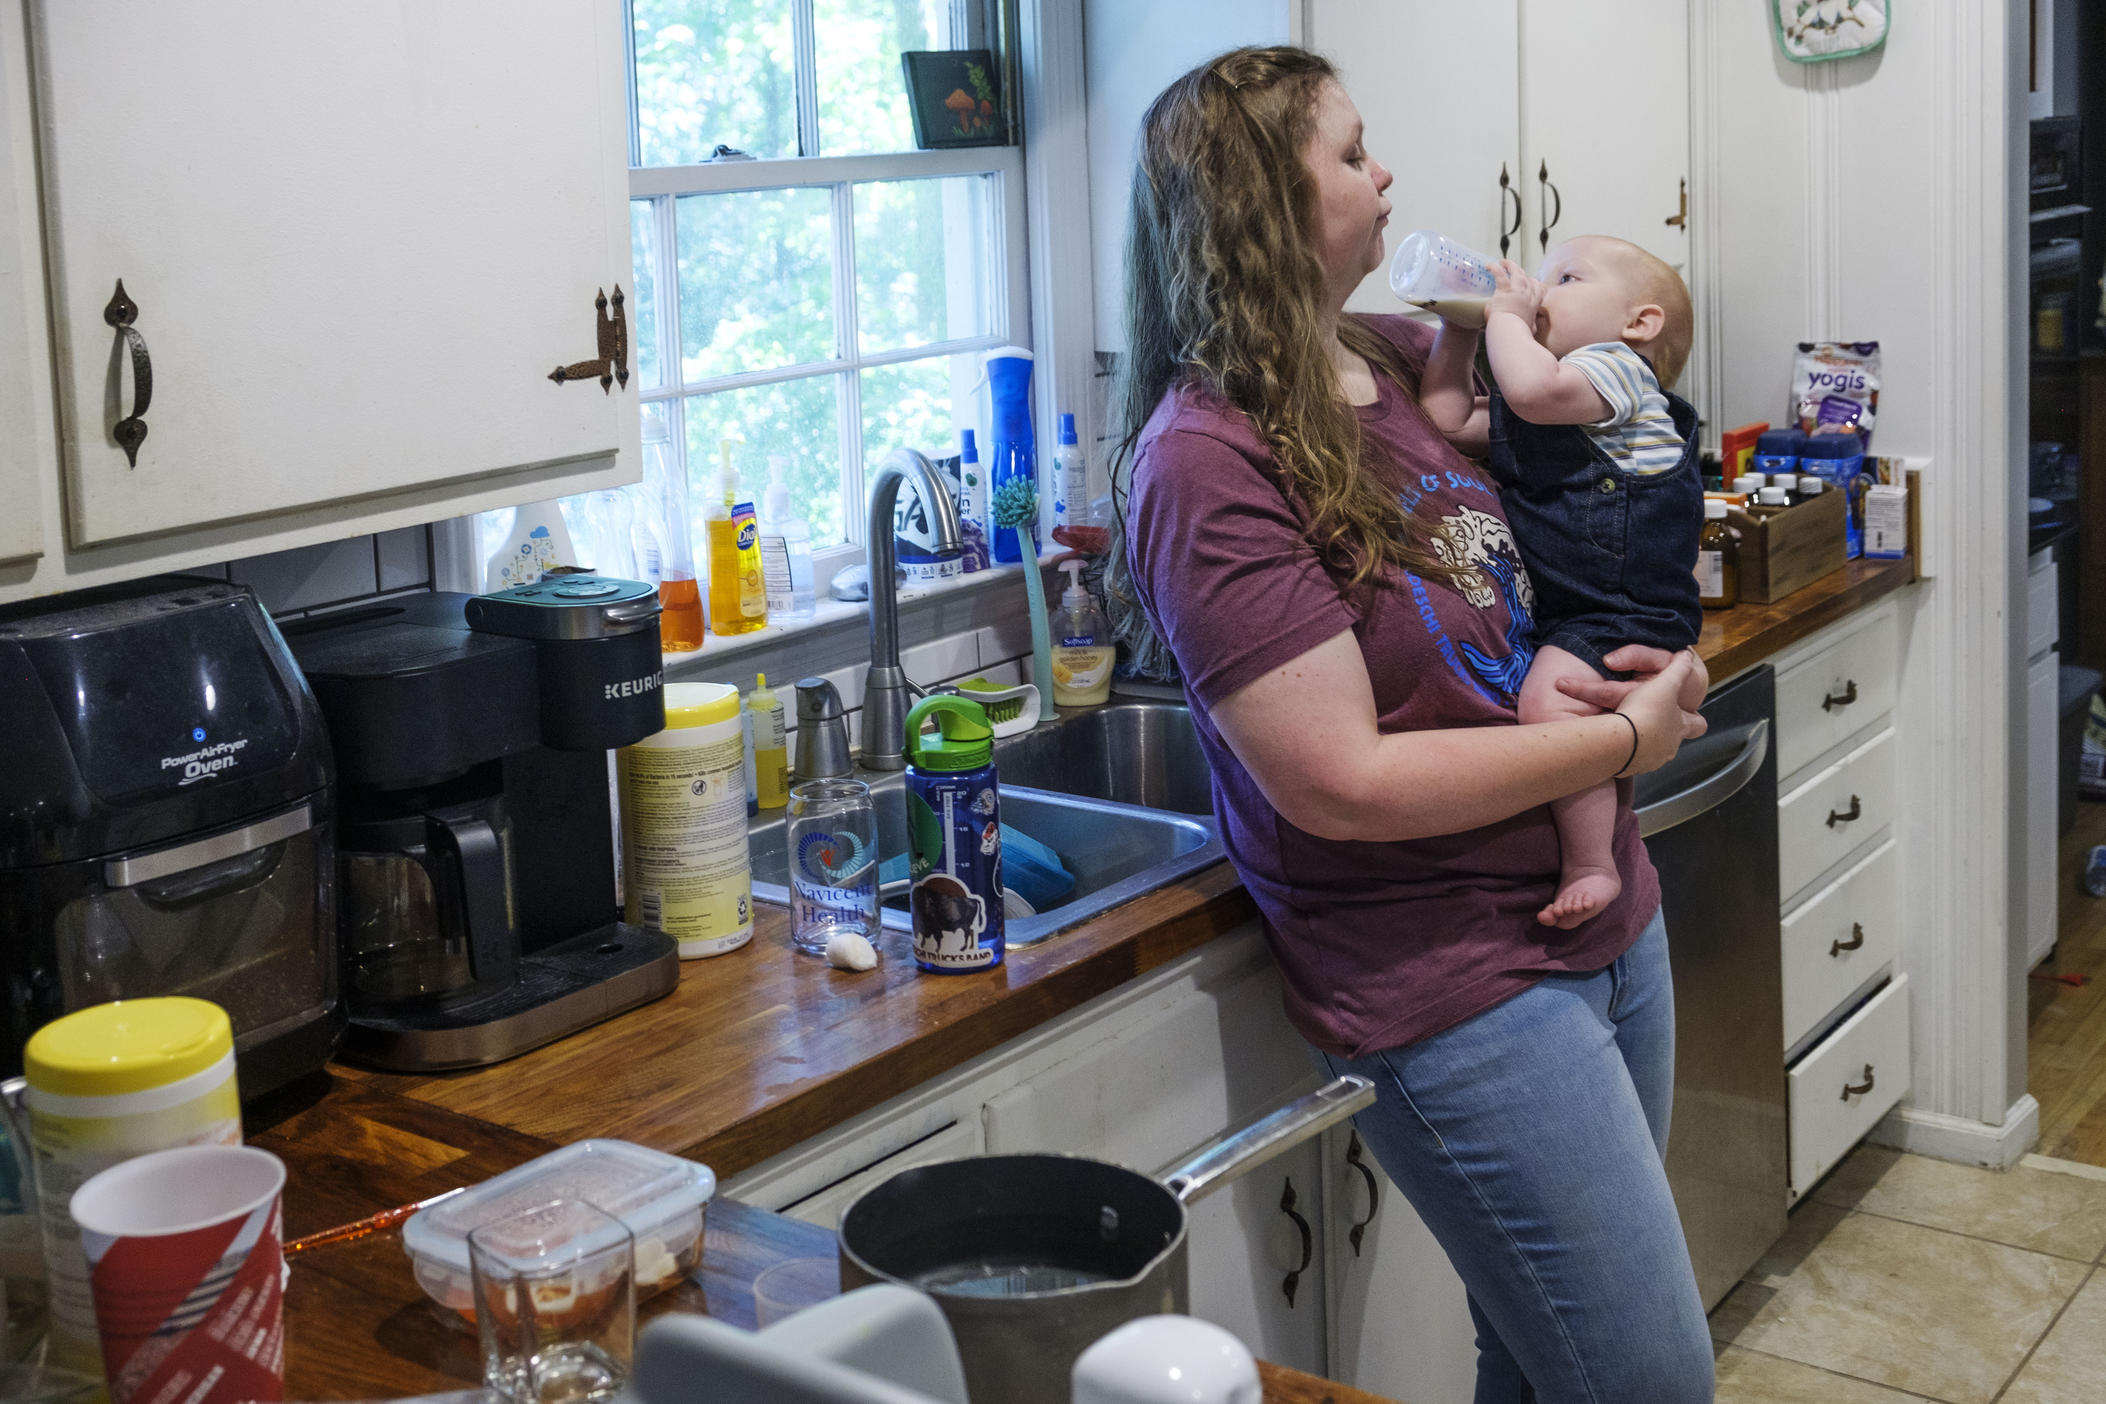 Maggie Reimer says the nationwide shortage of baby formula has disrupted her routine for feeding her son Marshall. Reimer says she's lucky that family members around the state have been mailing formula to Macon when they can find it.